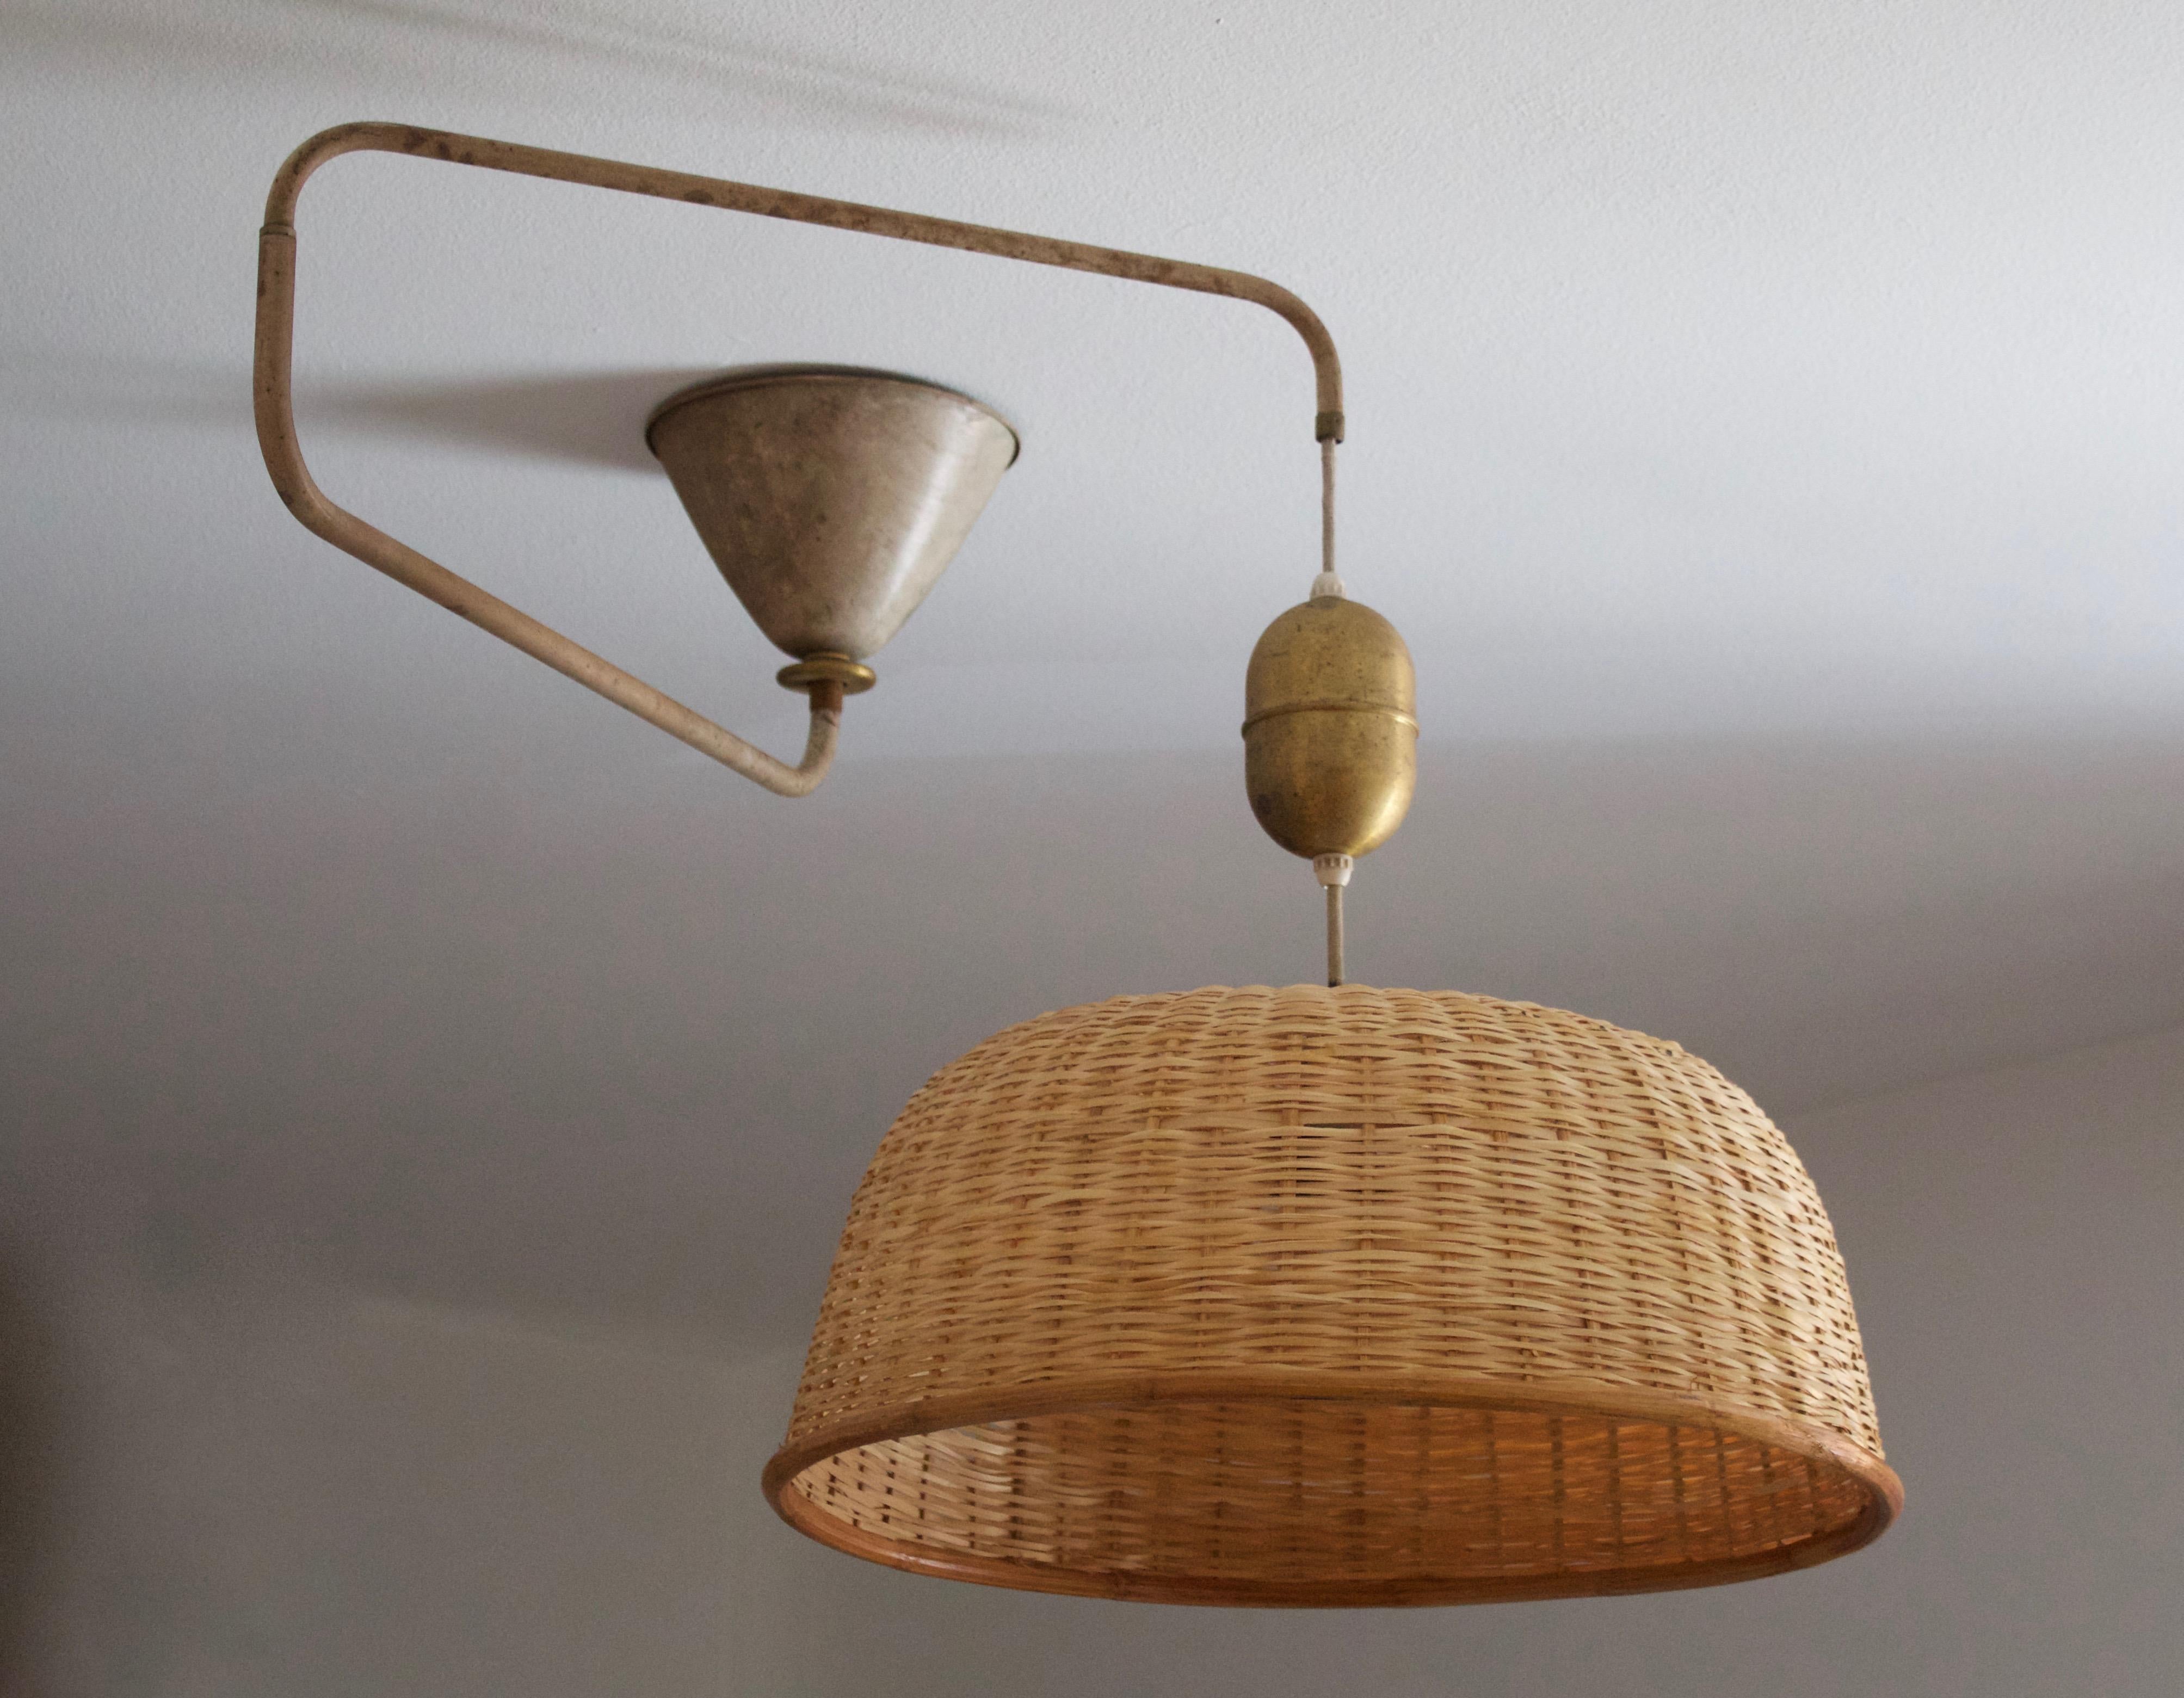 A sizable adjustable pendant light / task light. Designed and produced in Sweden, 1940s. Features an assorted vintage rattan / bamboo lampshade.

Adjustable, dimensions variable, measured as illustrated with lampshade attached.